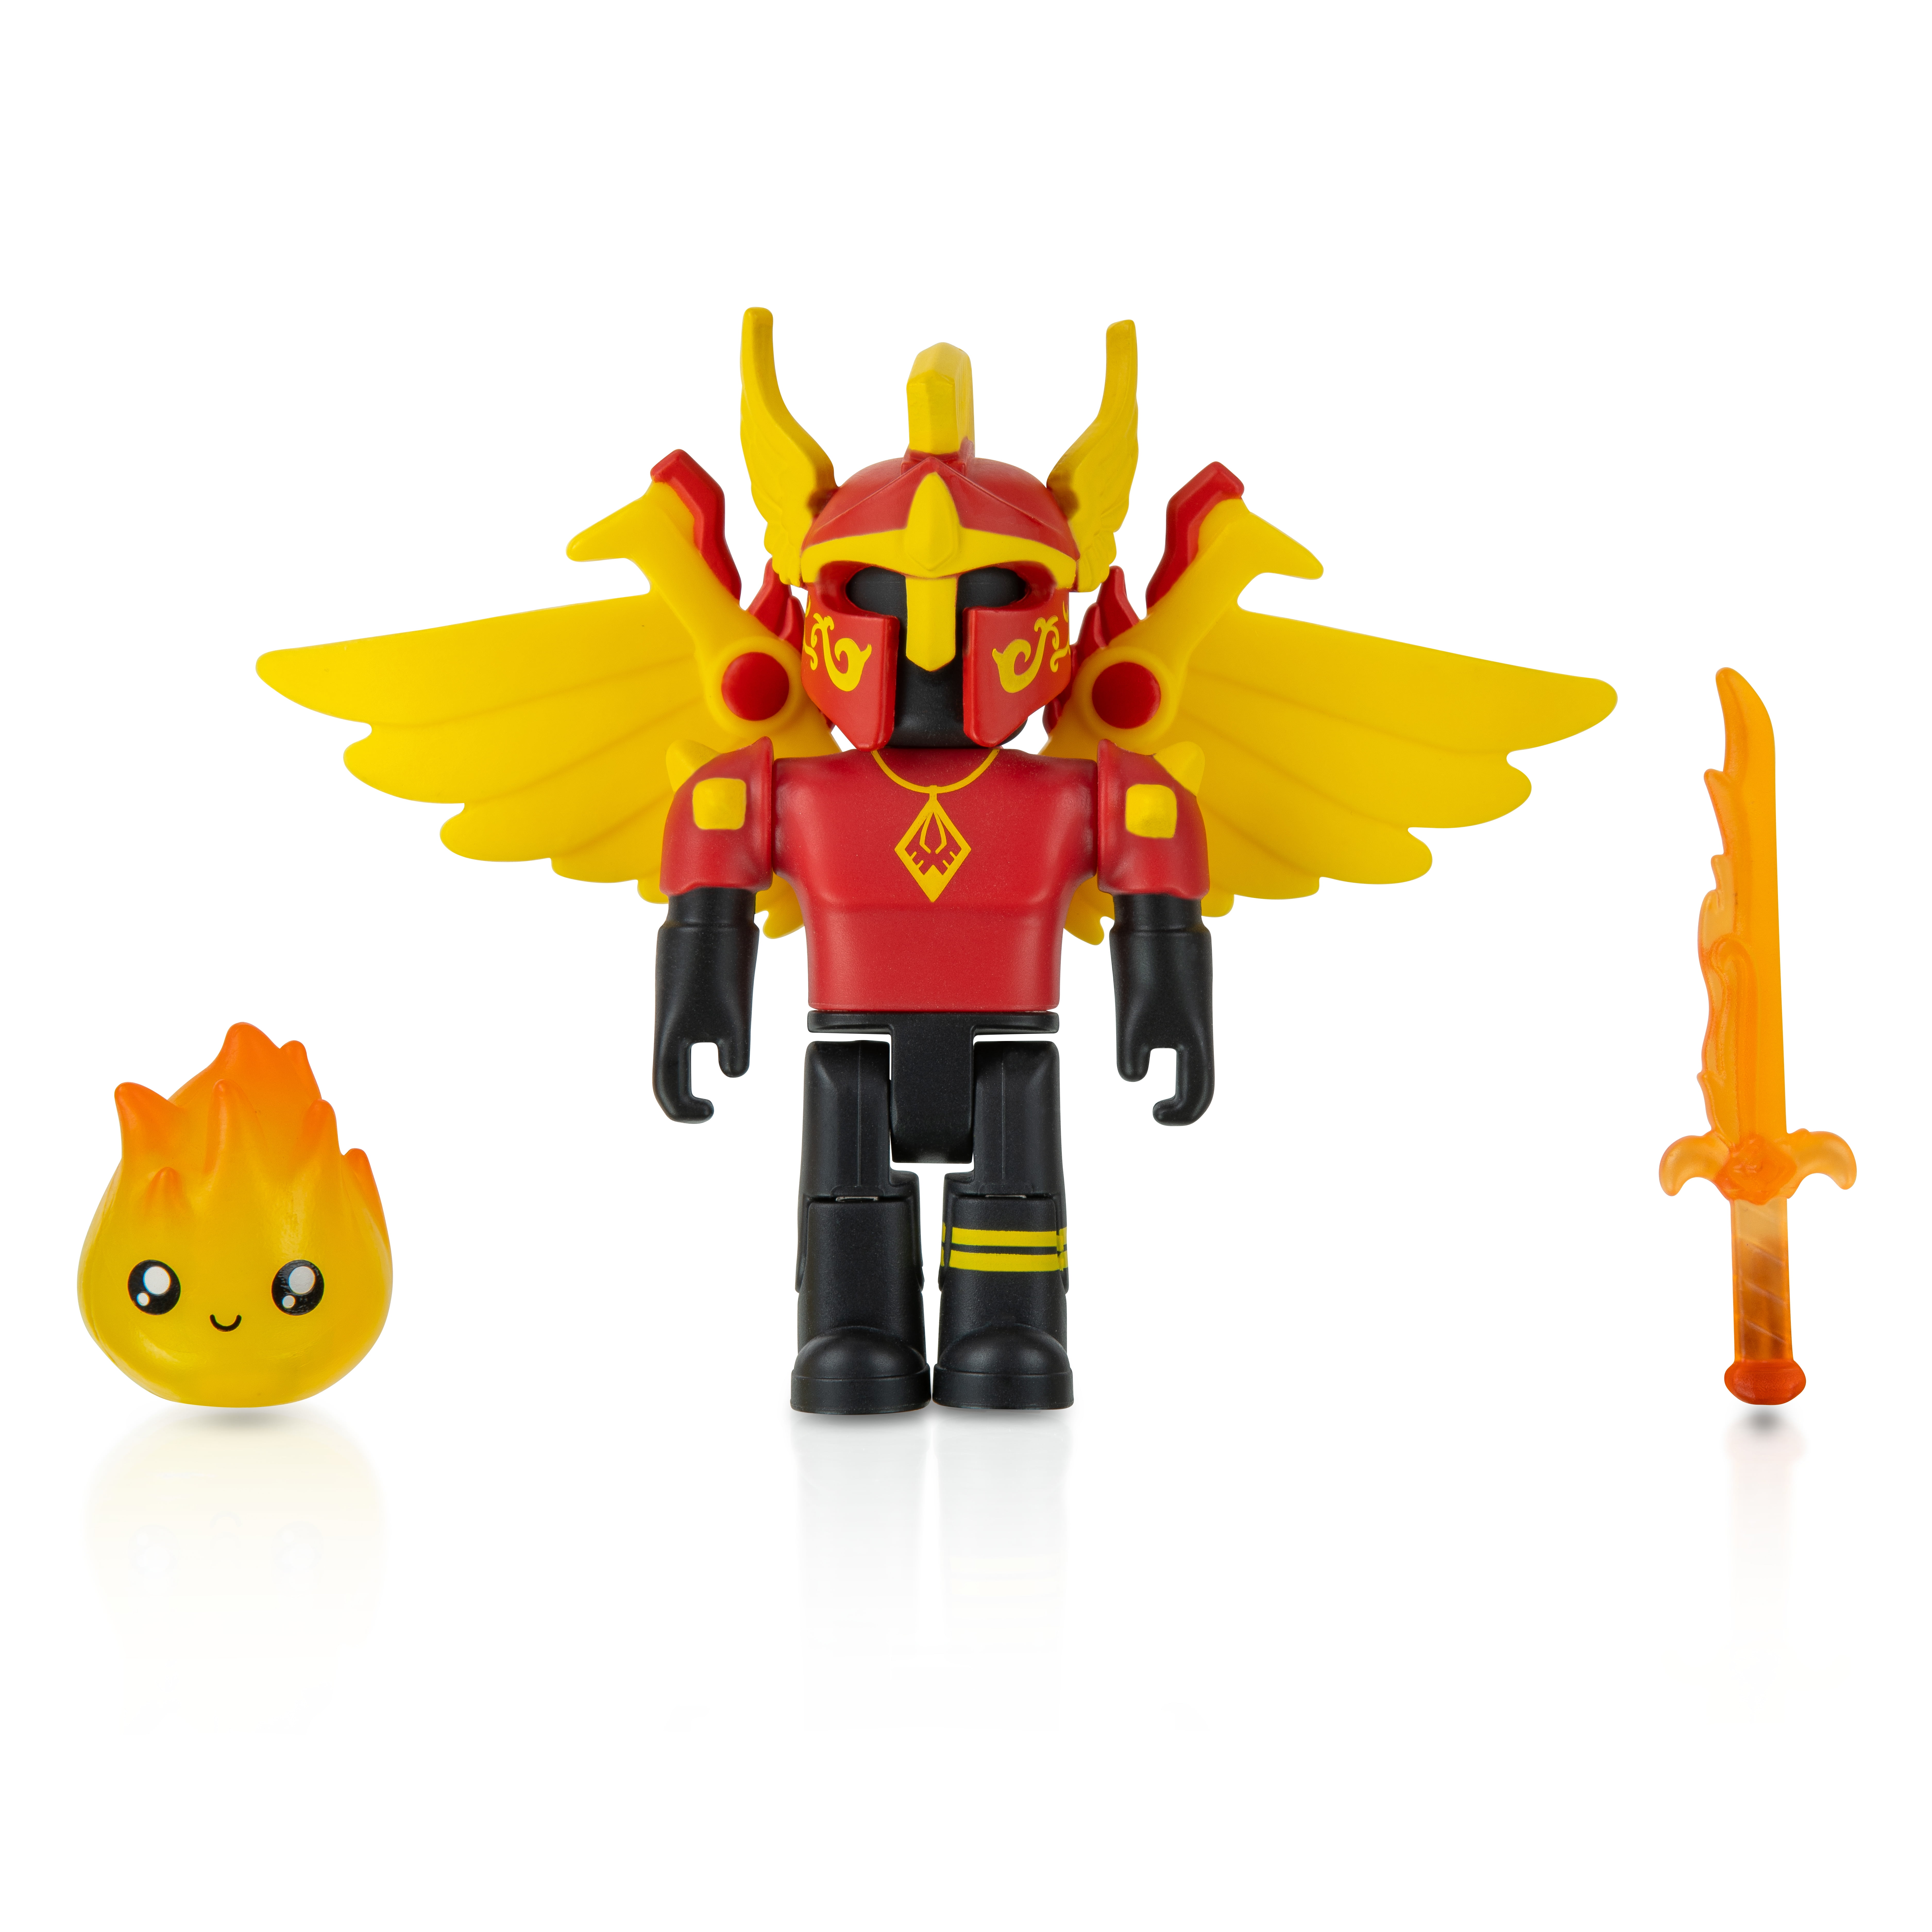  Roblox Action Collection - Lord Umberhallow Figure Pack  [Includes Exclusive Virtual Item] : Toys & Games